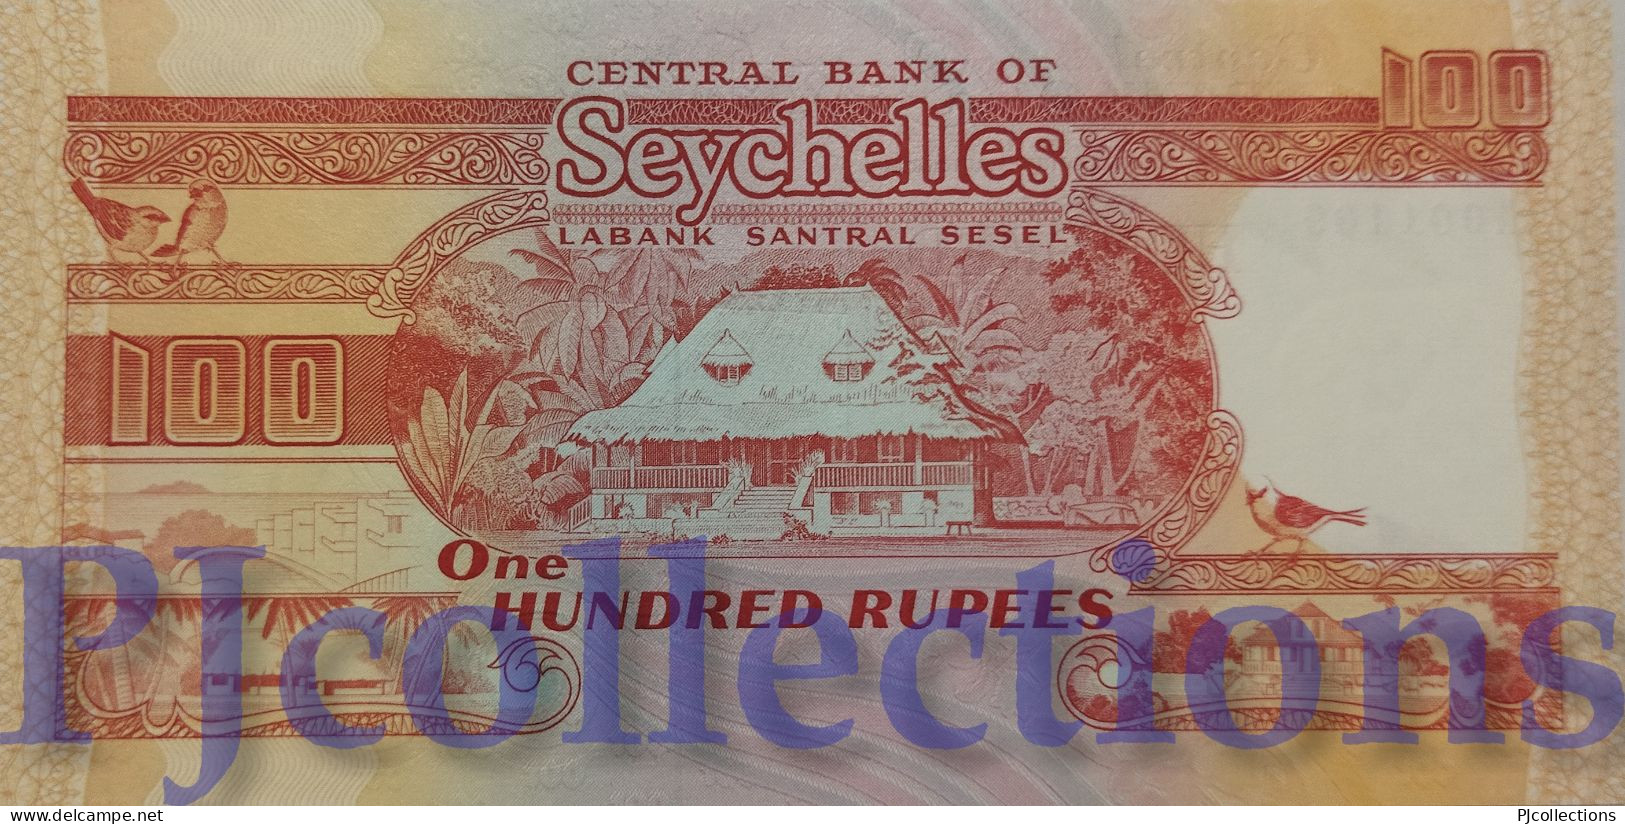 SEYCHELLES 100 RUPEES 1989 PICK 35 UNC LOW SERIAL NUMBER "A001109" - Seychelles